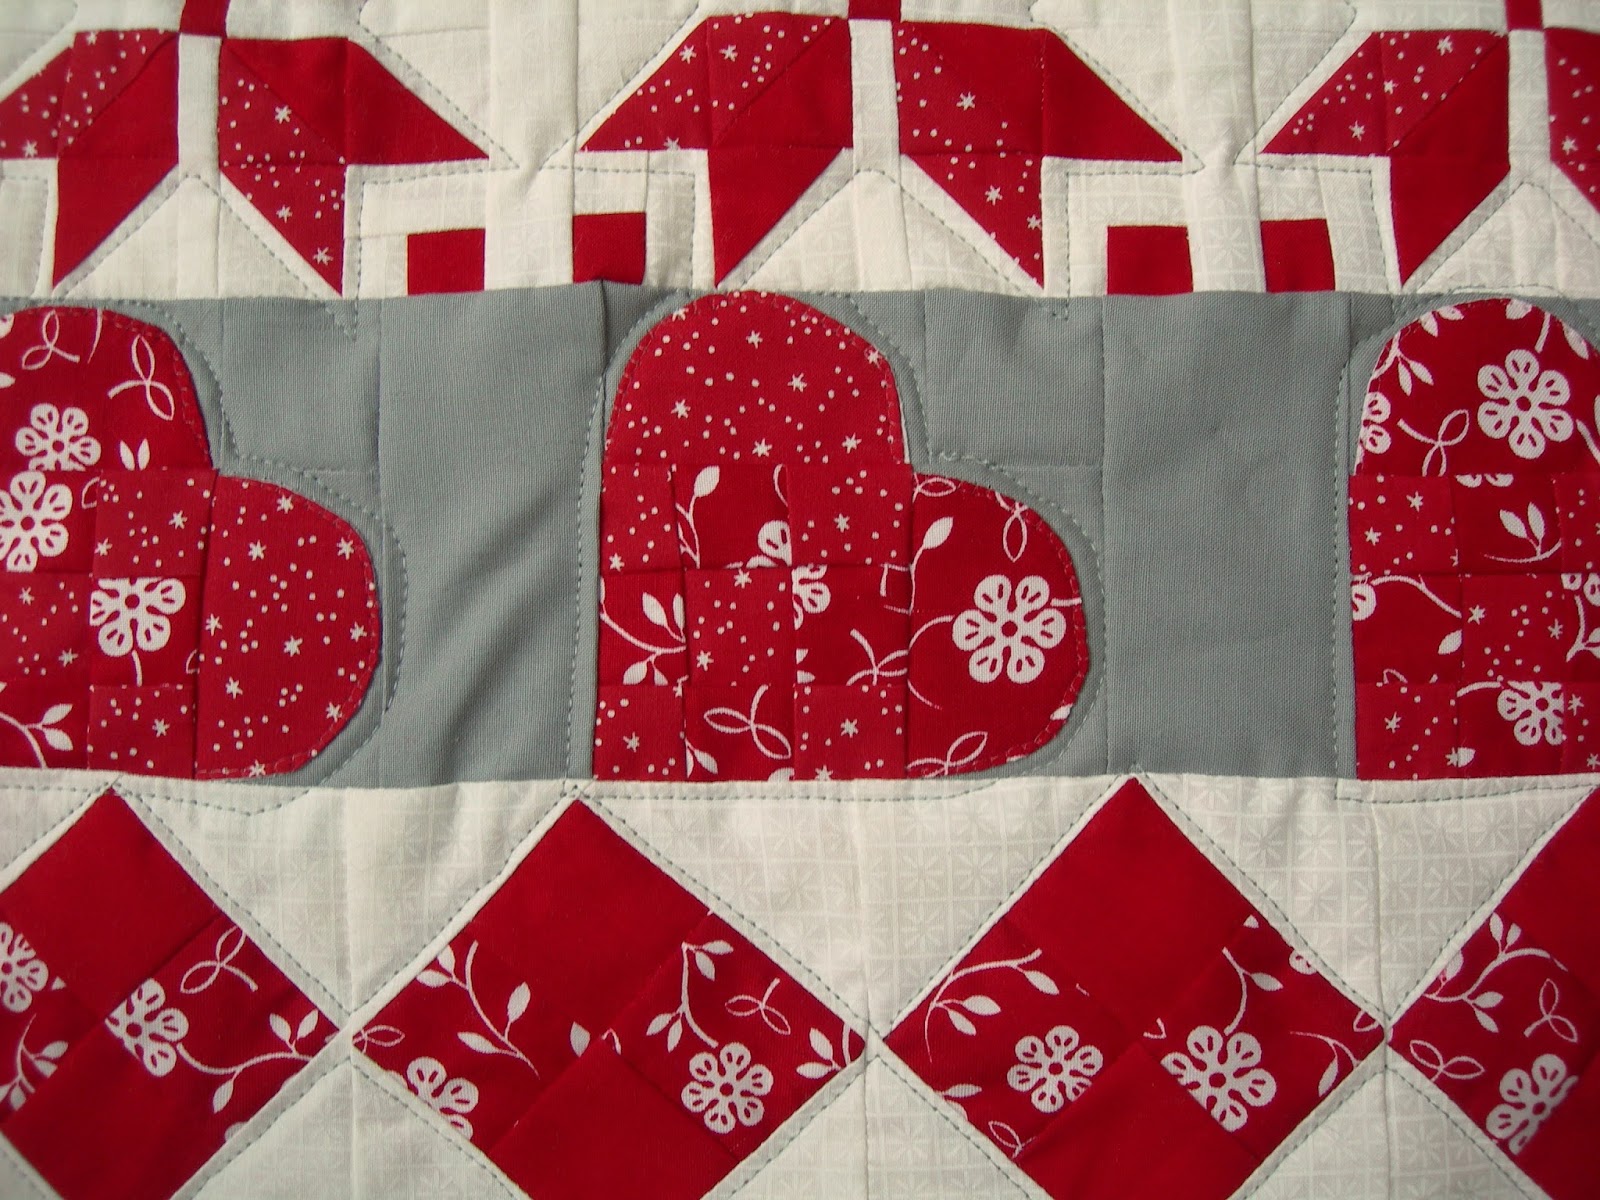 Simple Quilting by Susie @ Susie's Sunroom